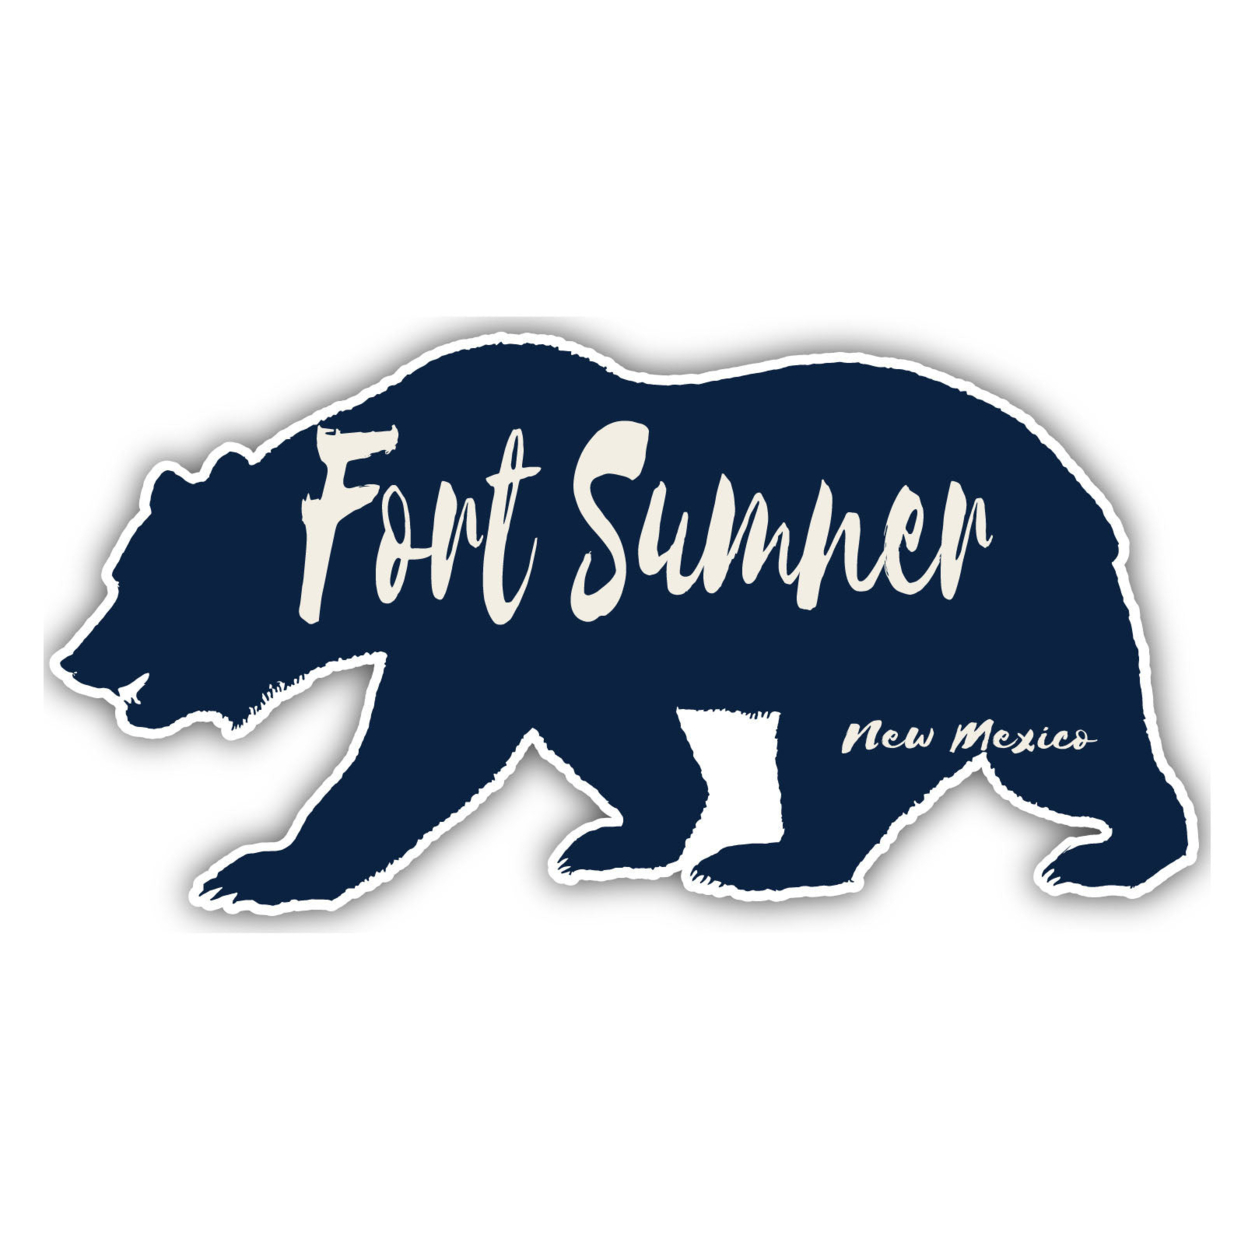 Fort Sumner New Mexico Souvenir Decorative Stickers (Choose Theme And Size) - Single Unit, 6-Inch, Bear